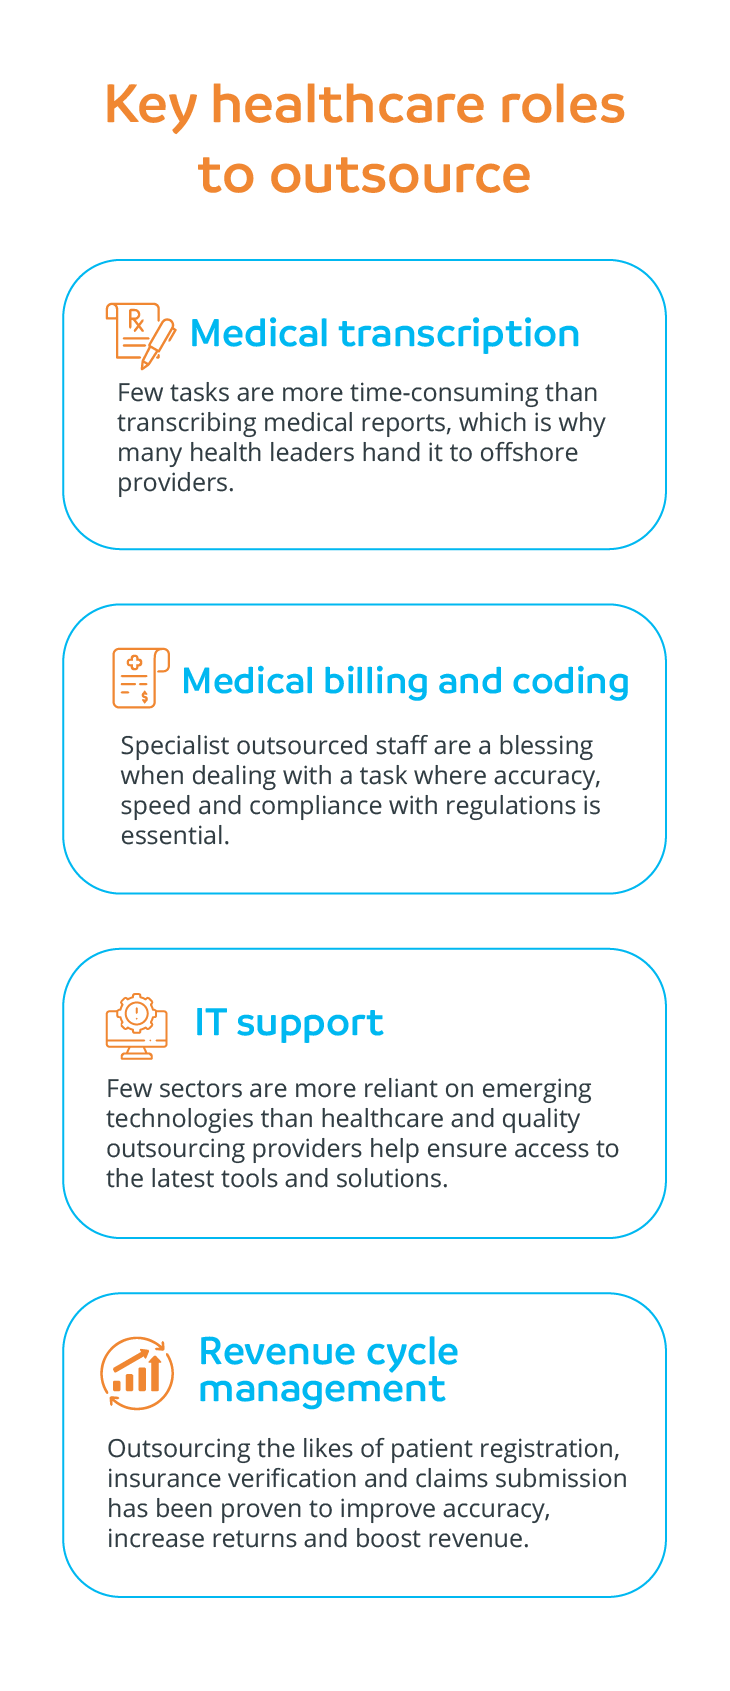 Key healthcare roles to outsource